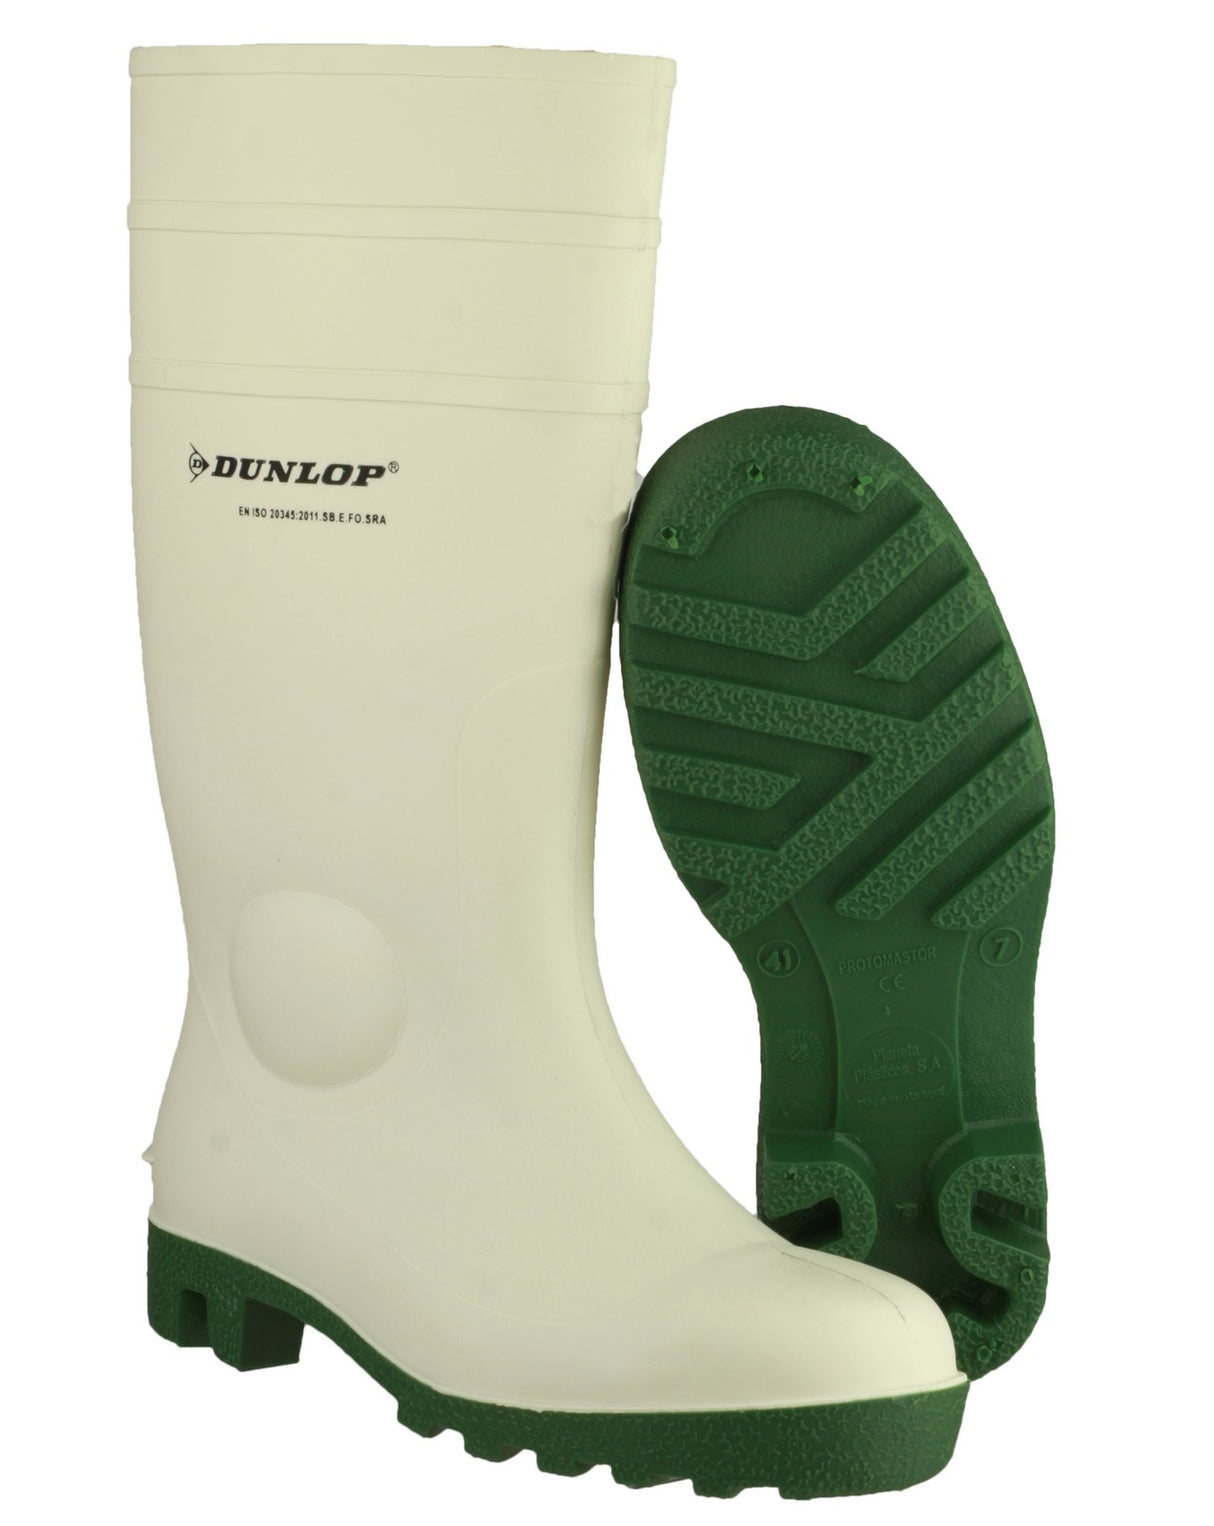 Dunlop Protomastor Safety 171BV Toe Protection Wellingtons Boots - White